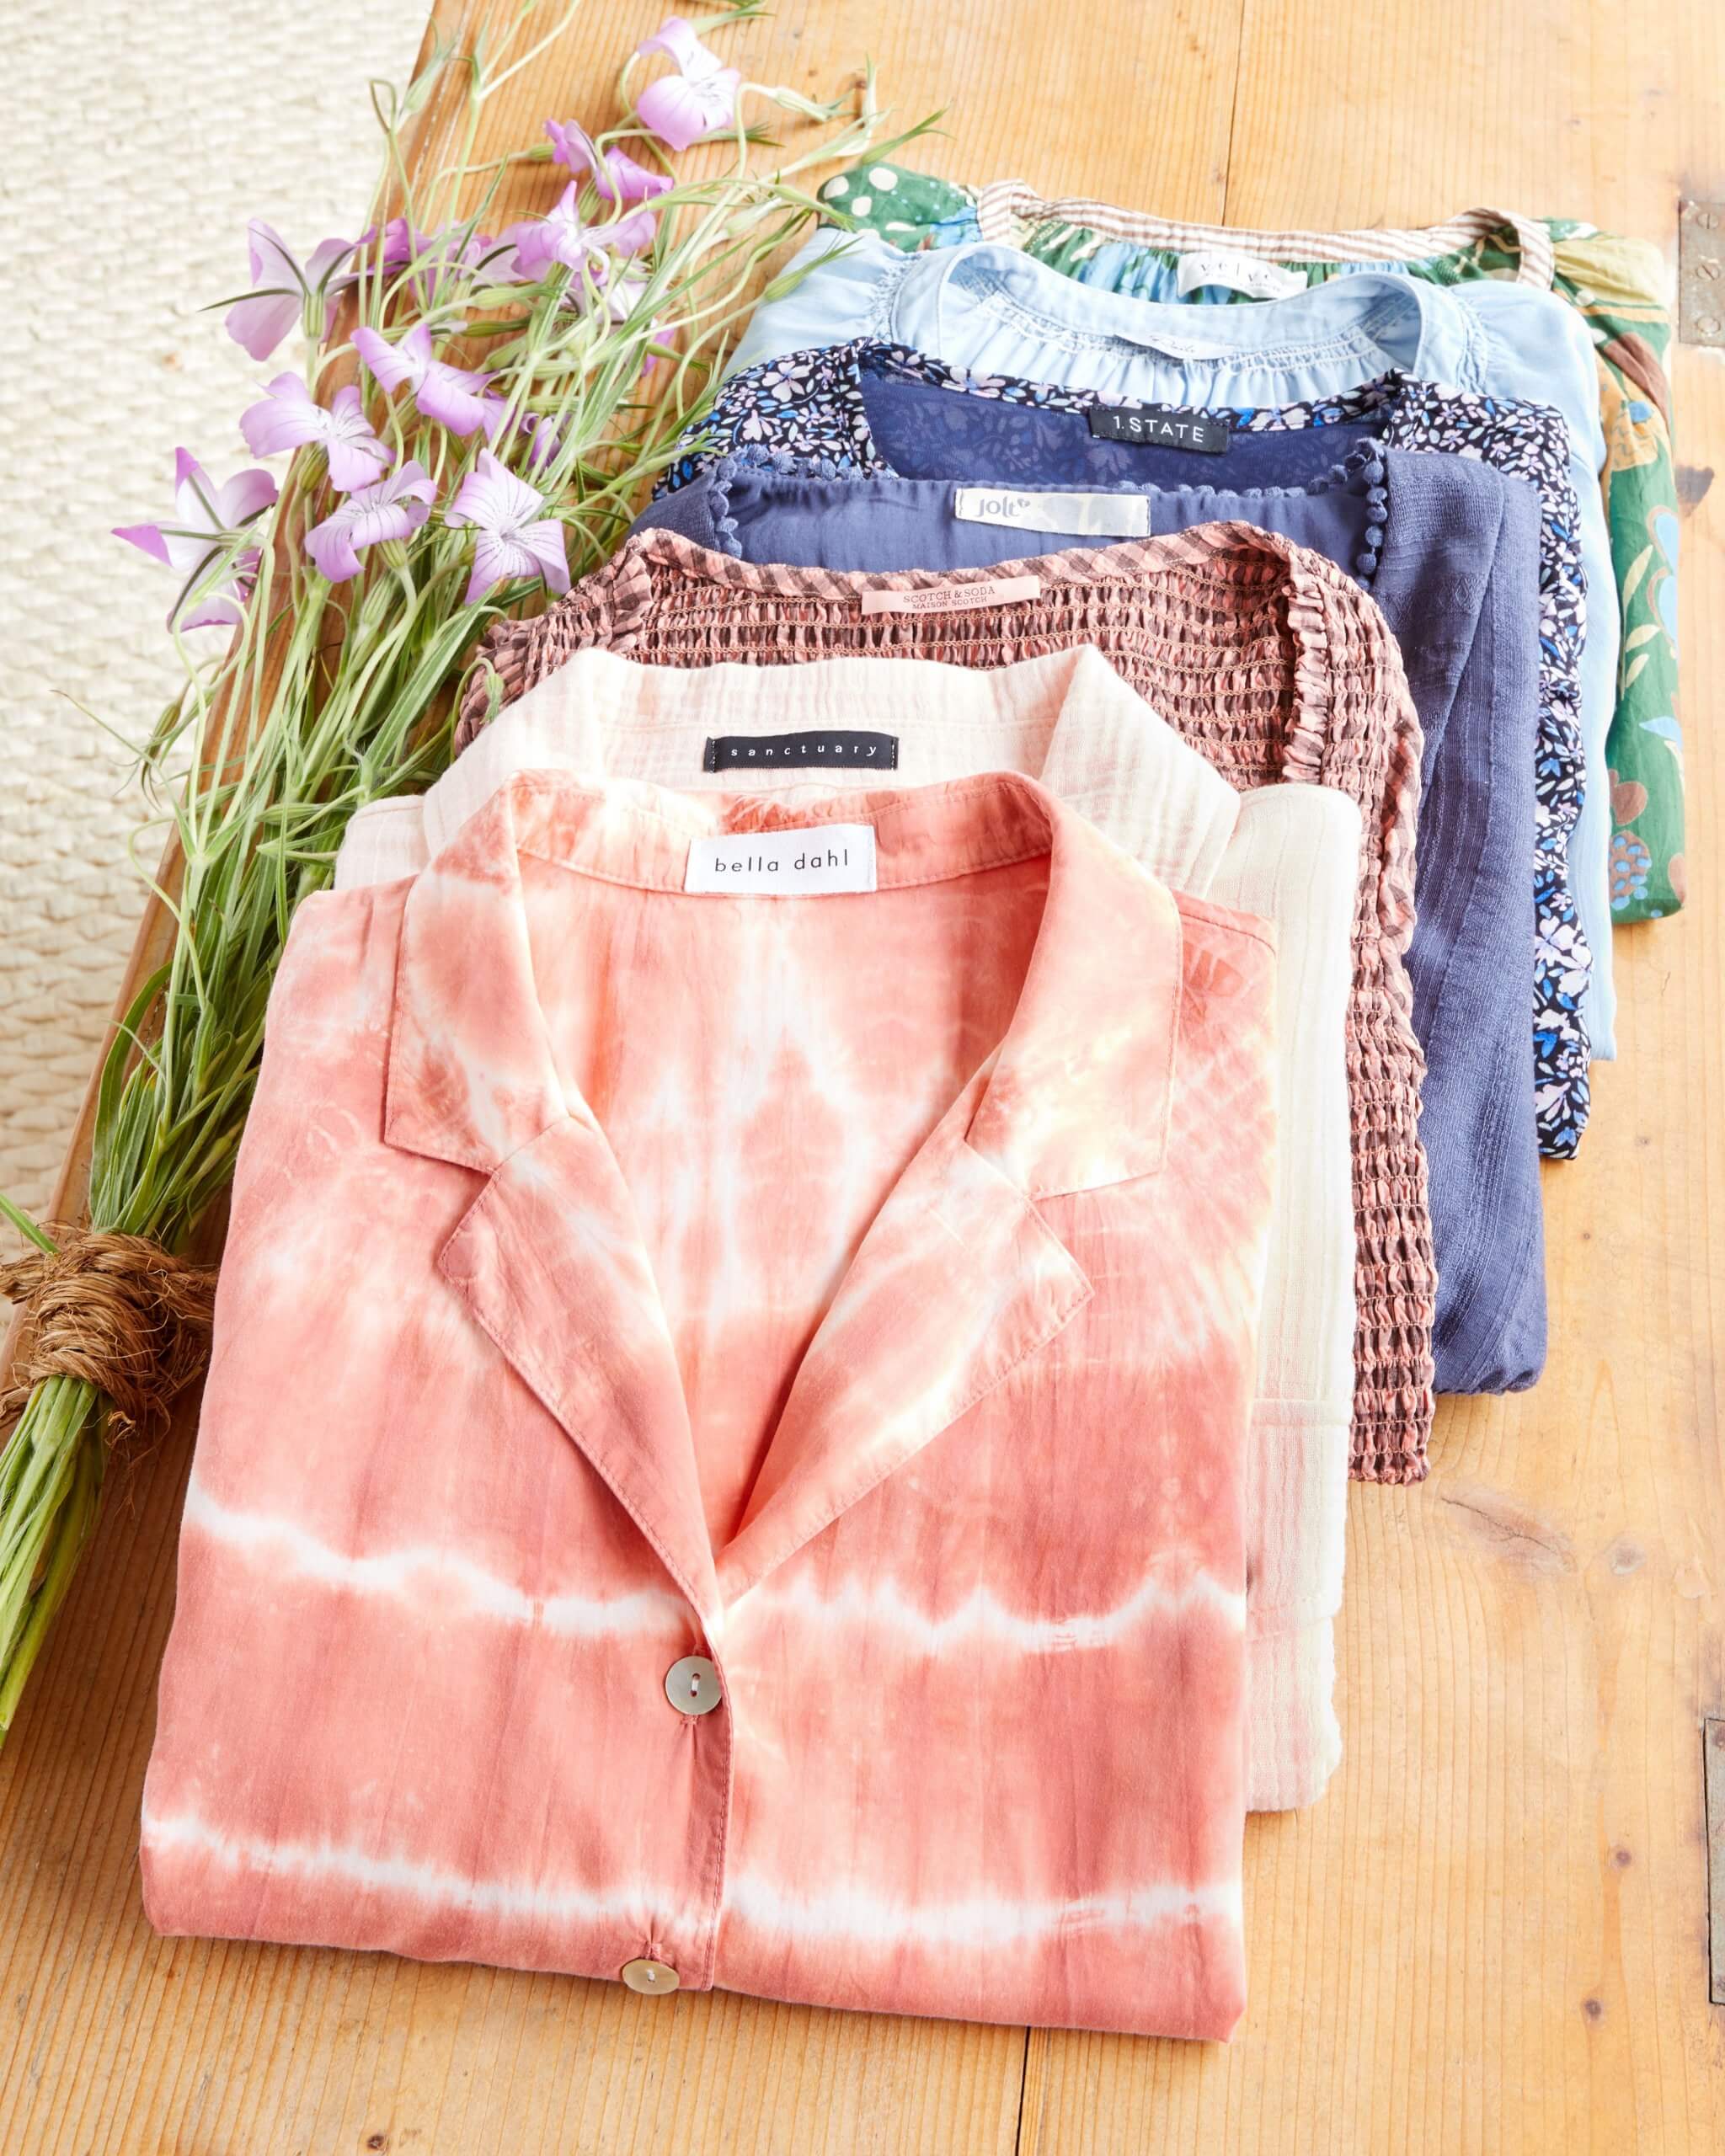 Stitch Fix Women’s outfit laydown featuring folded shirts in a pile in pink, white, purple, blue and green tones on a wooden table. 